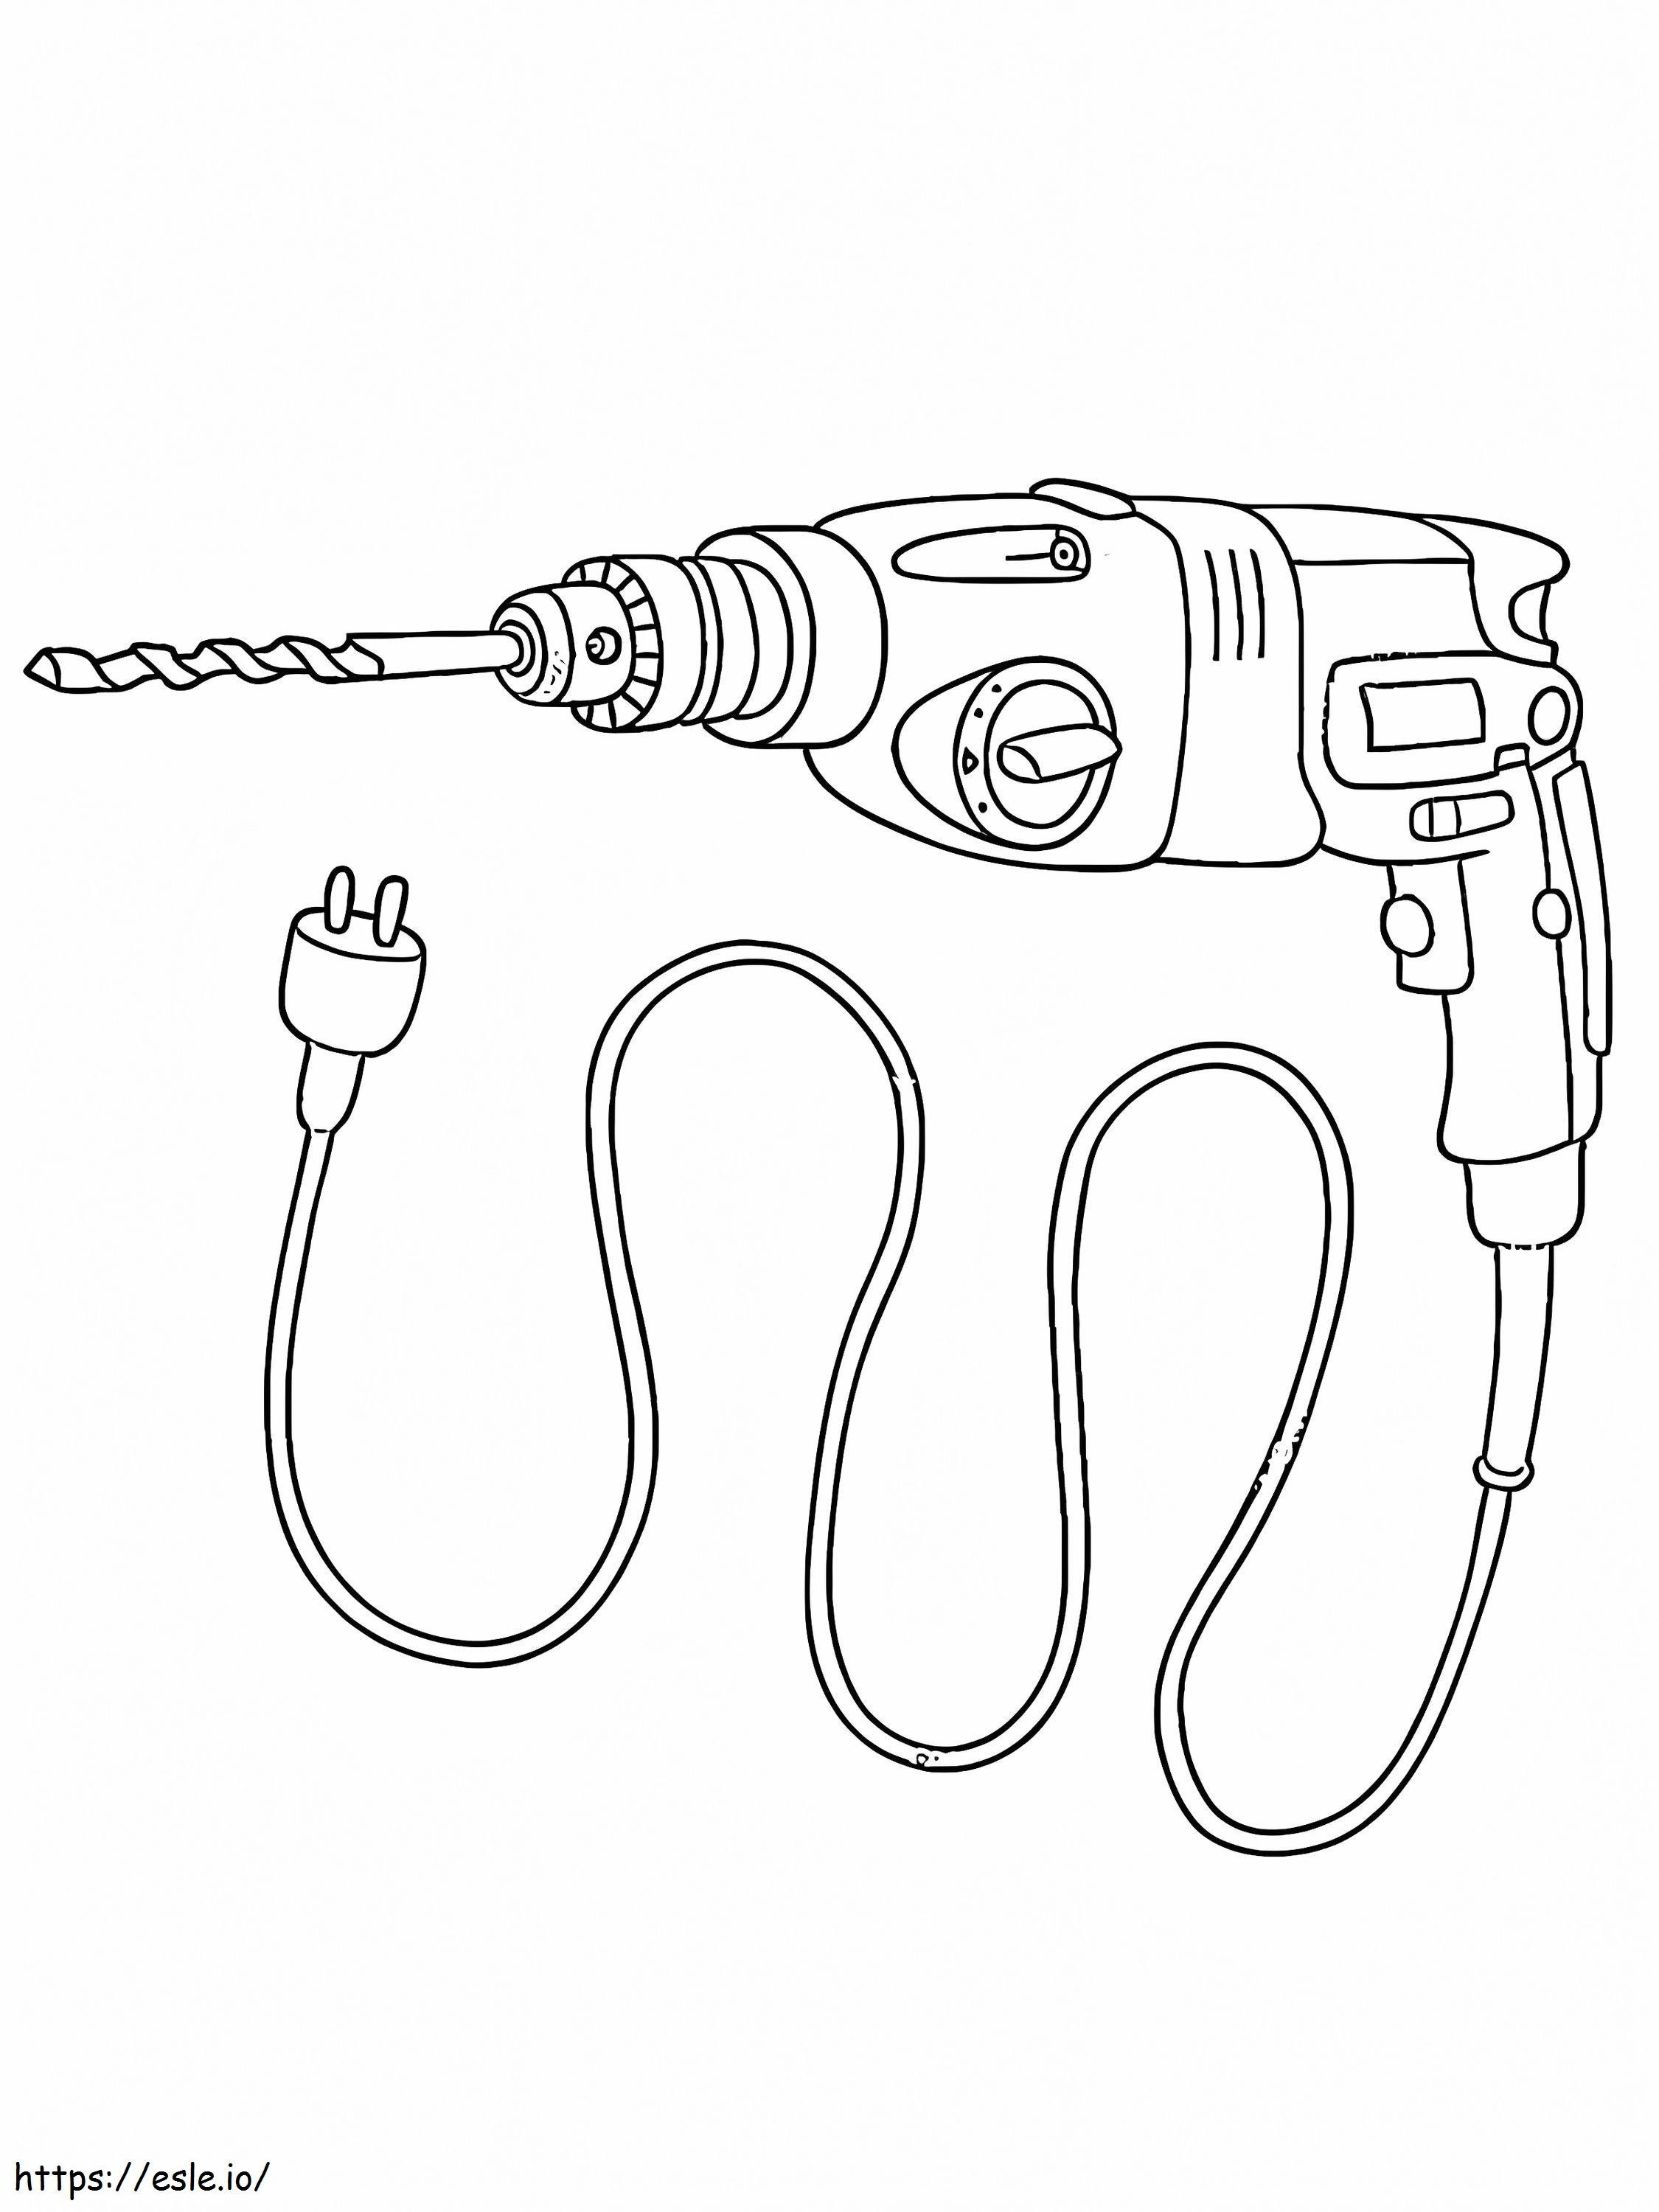 Printable Drill coloring page